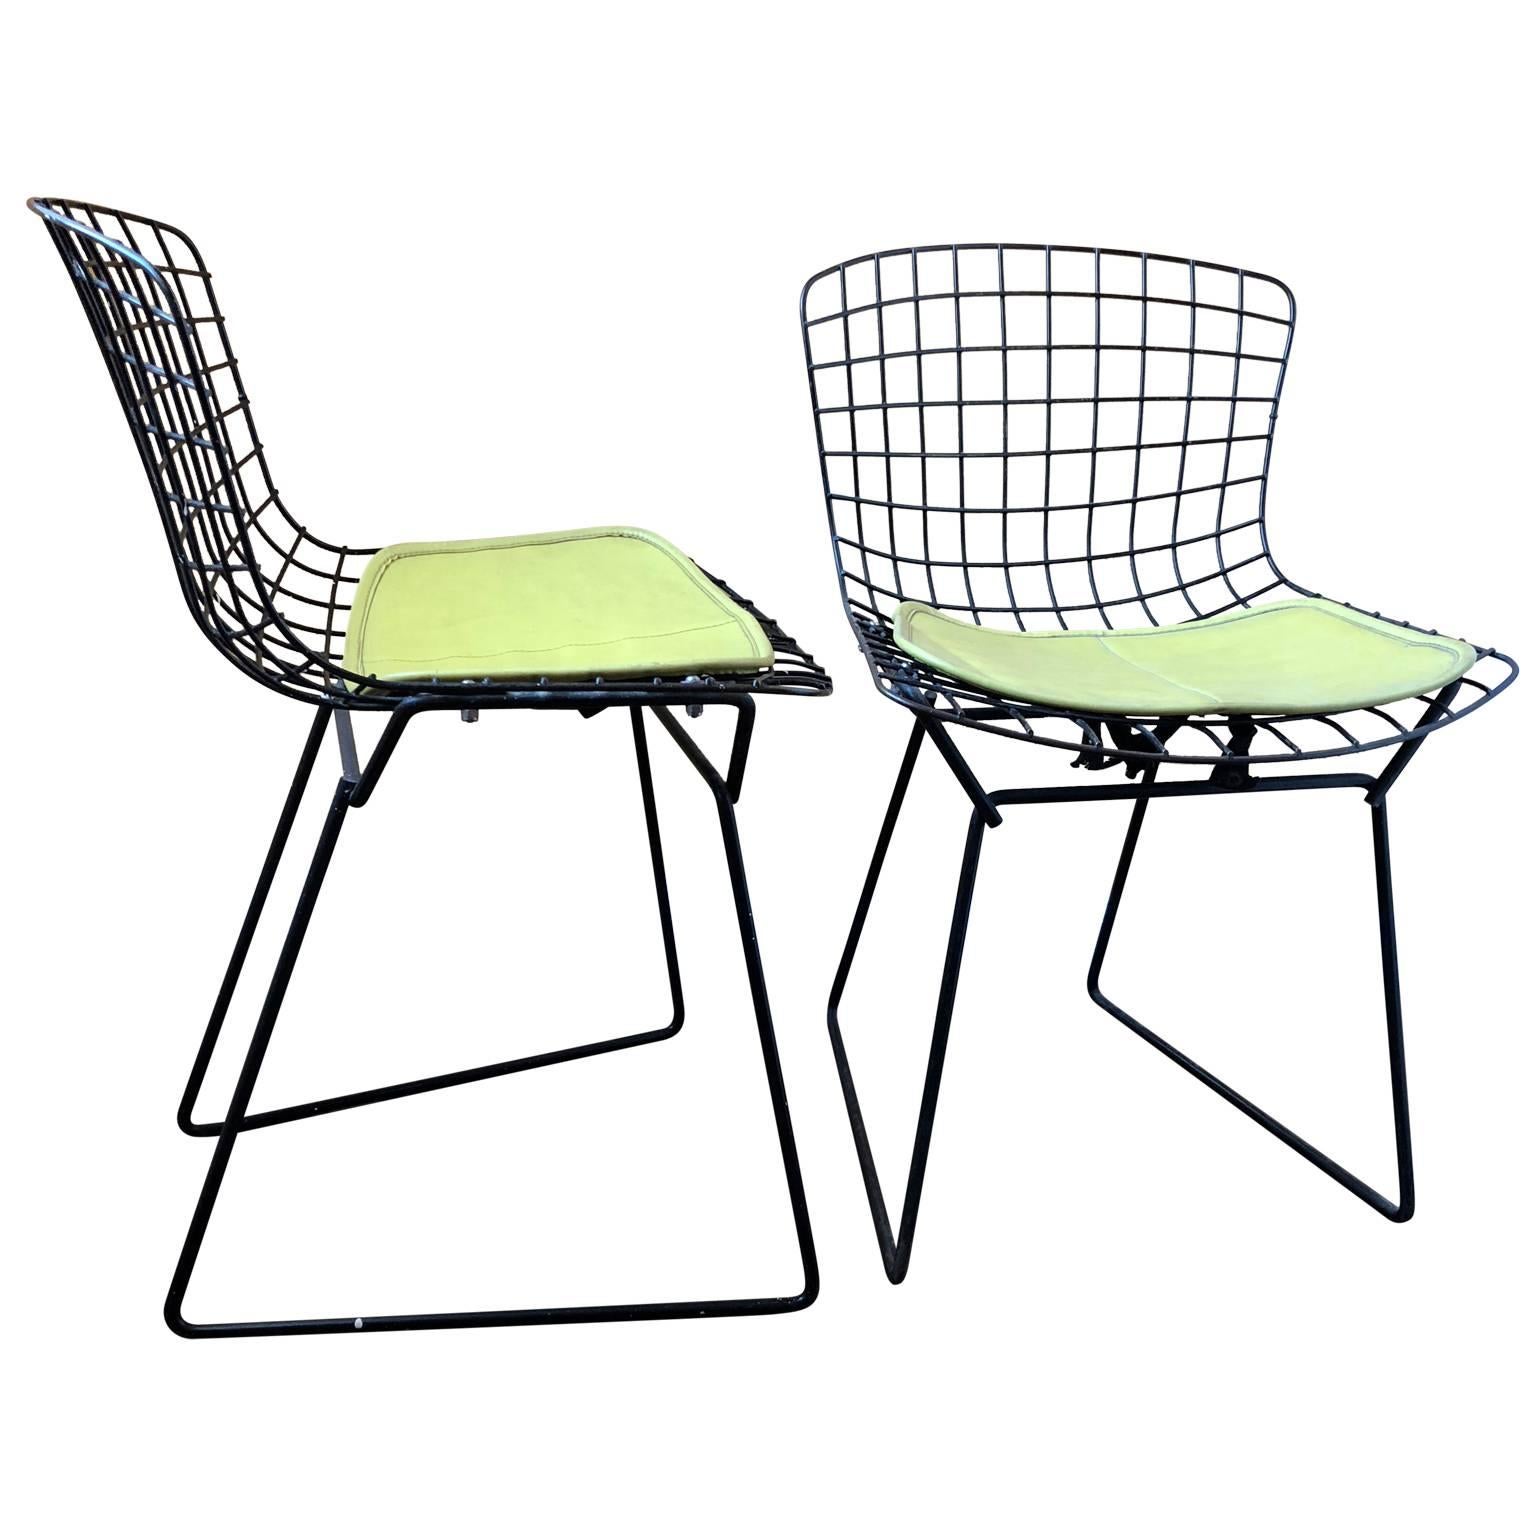 Late 20th Century Pair of Smaller Black Wire Bertoia Children's Chairs with Yellow Fabric by Knoll